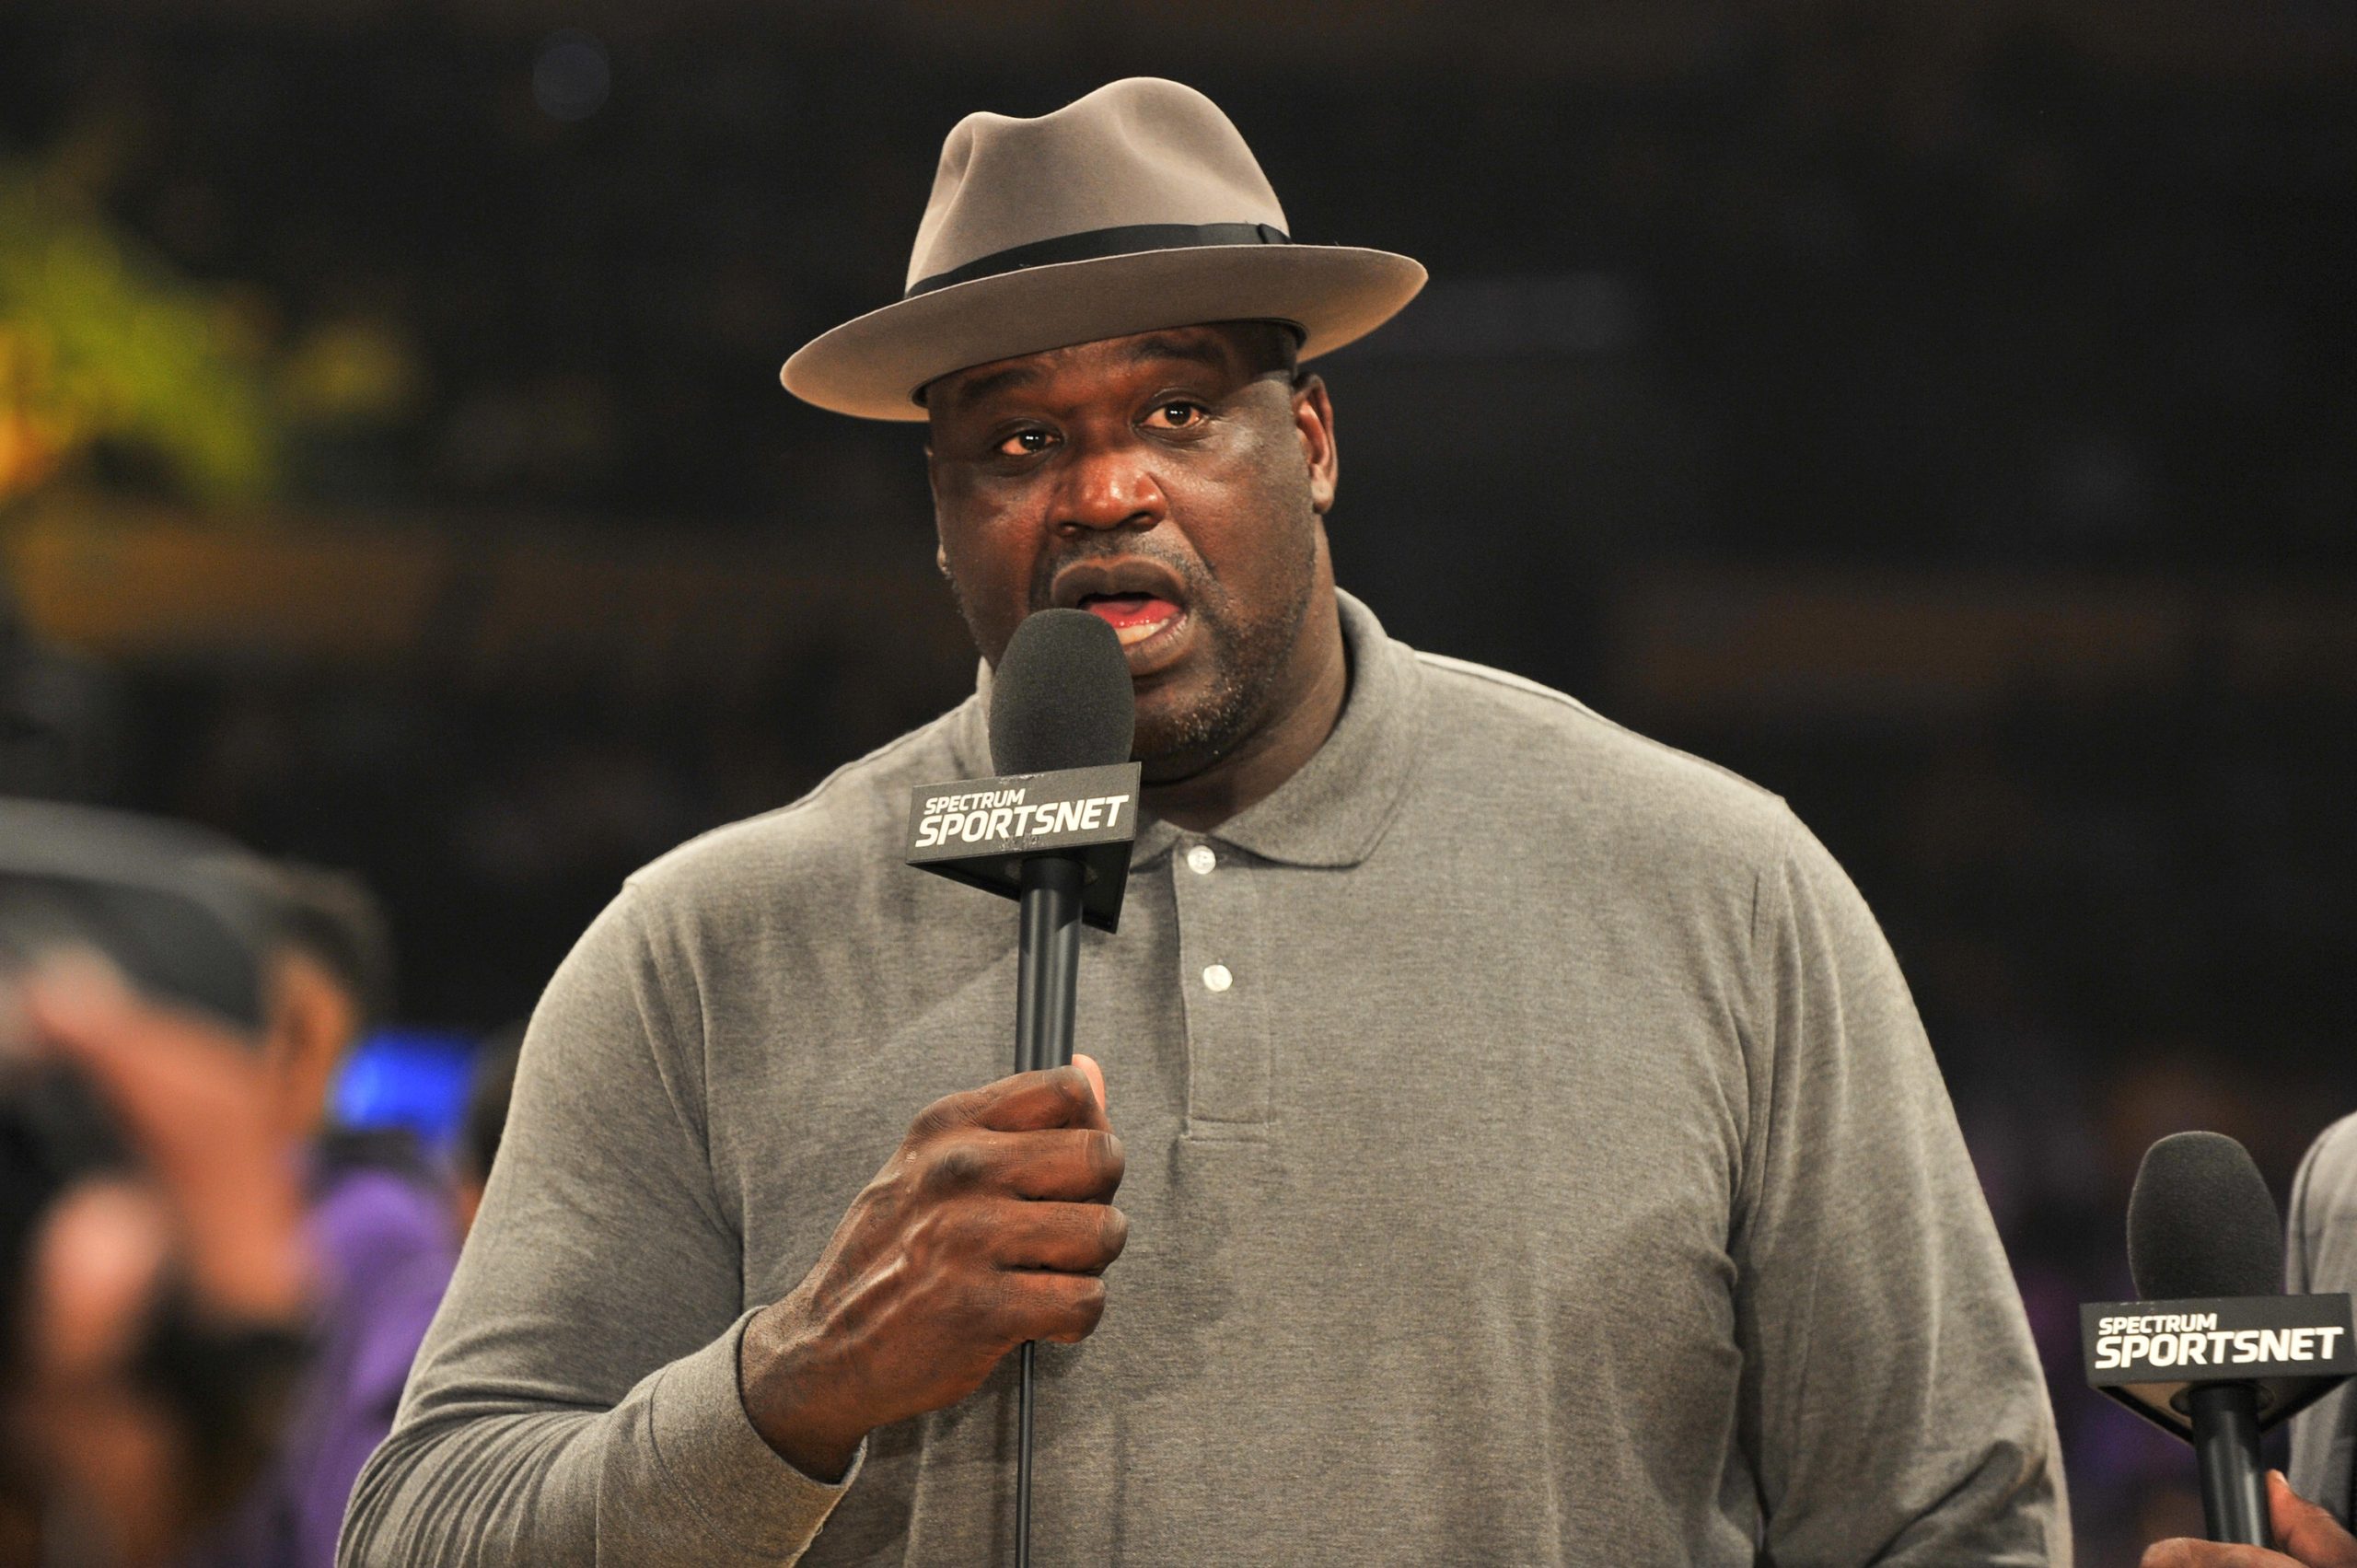 Shaquille O'Neal Explains the Impact Len Bias' Death Had on Him